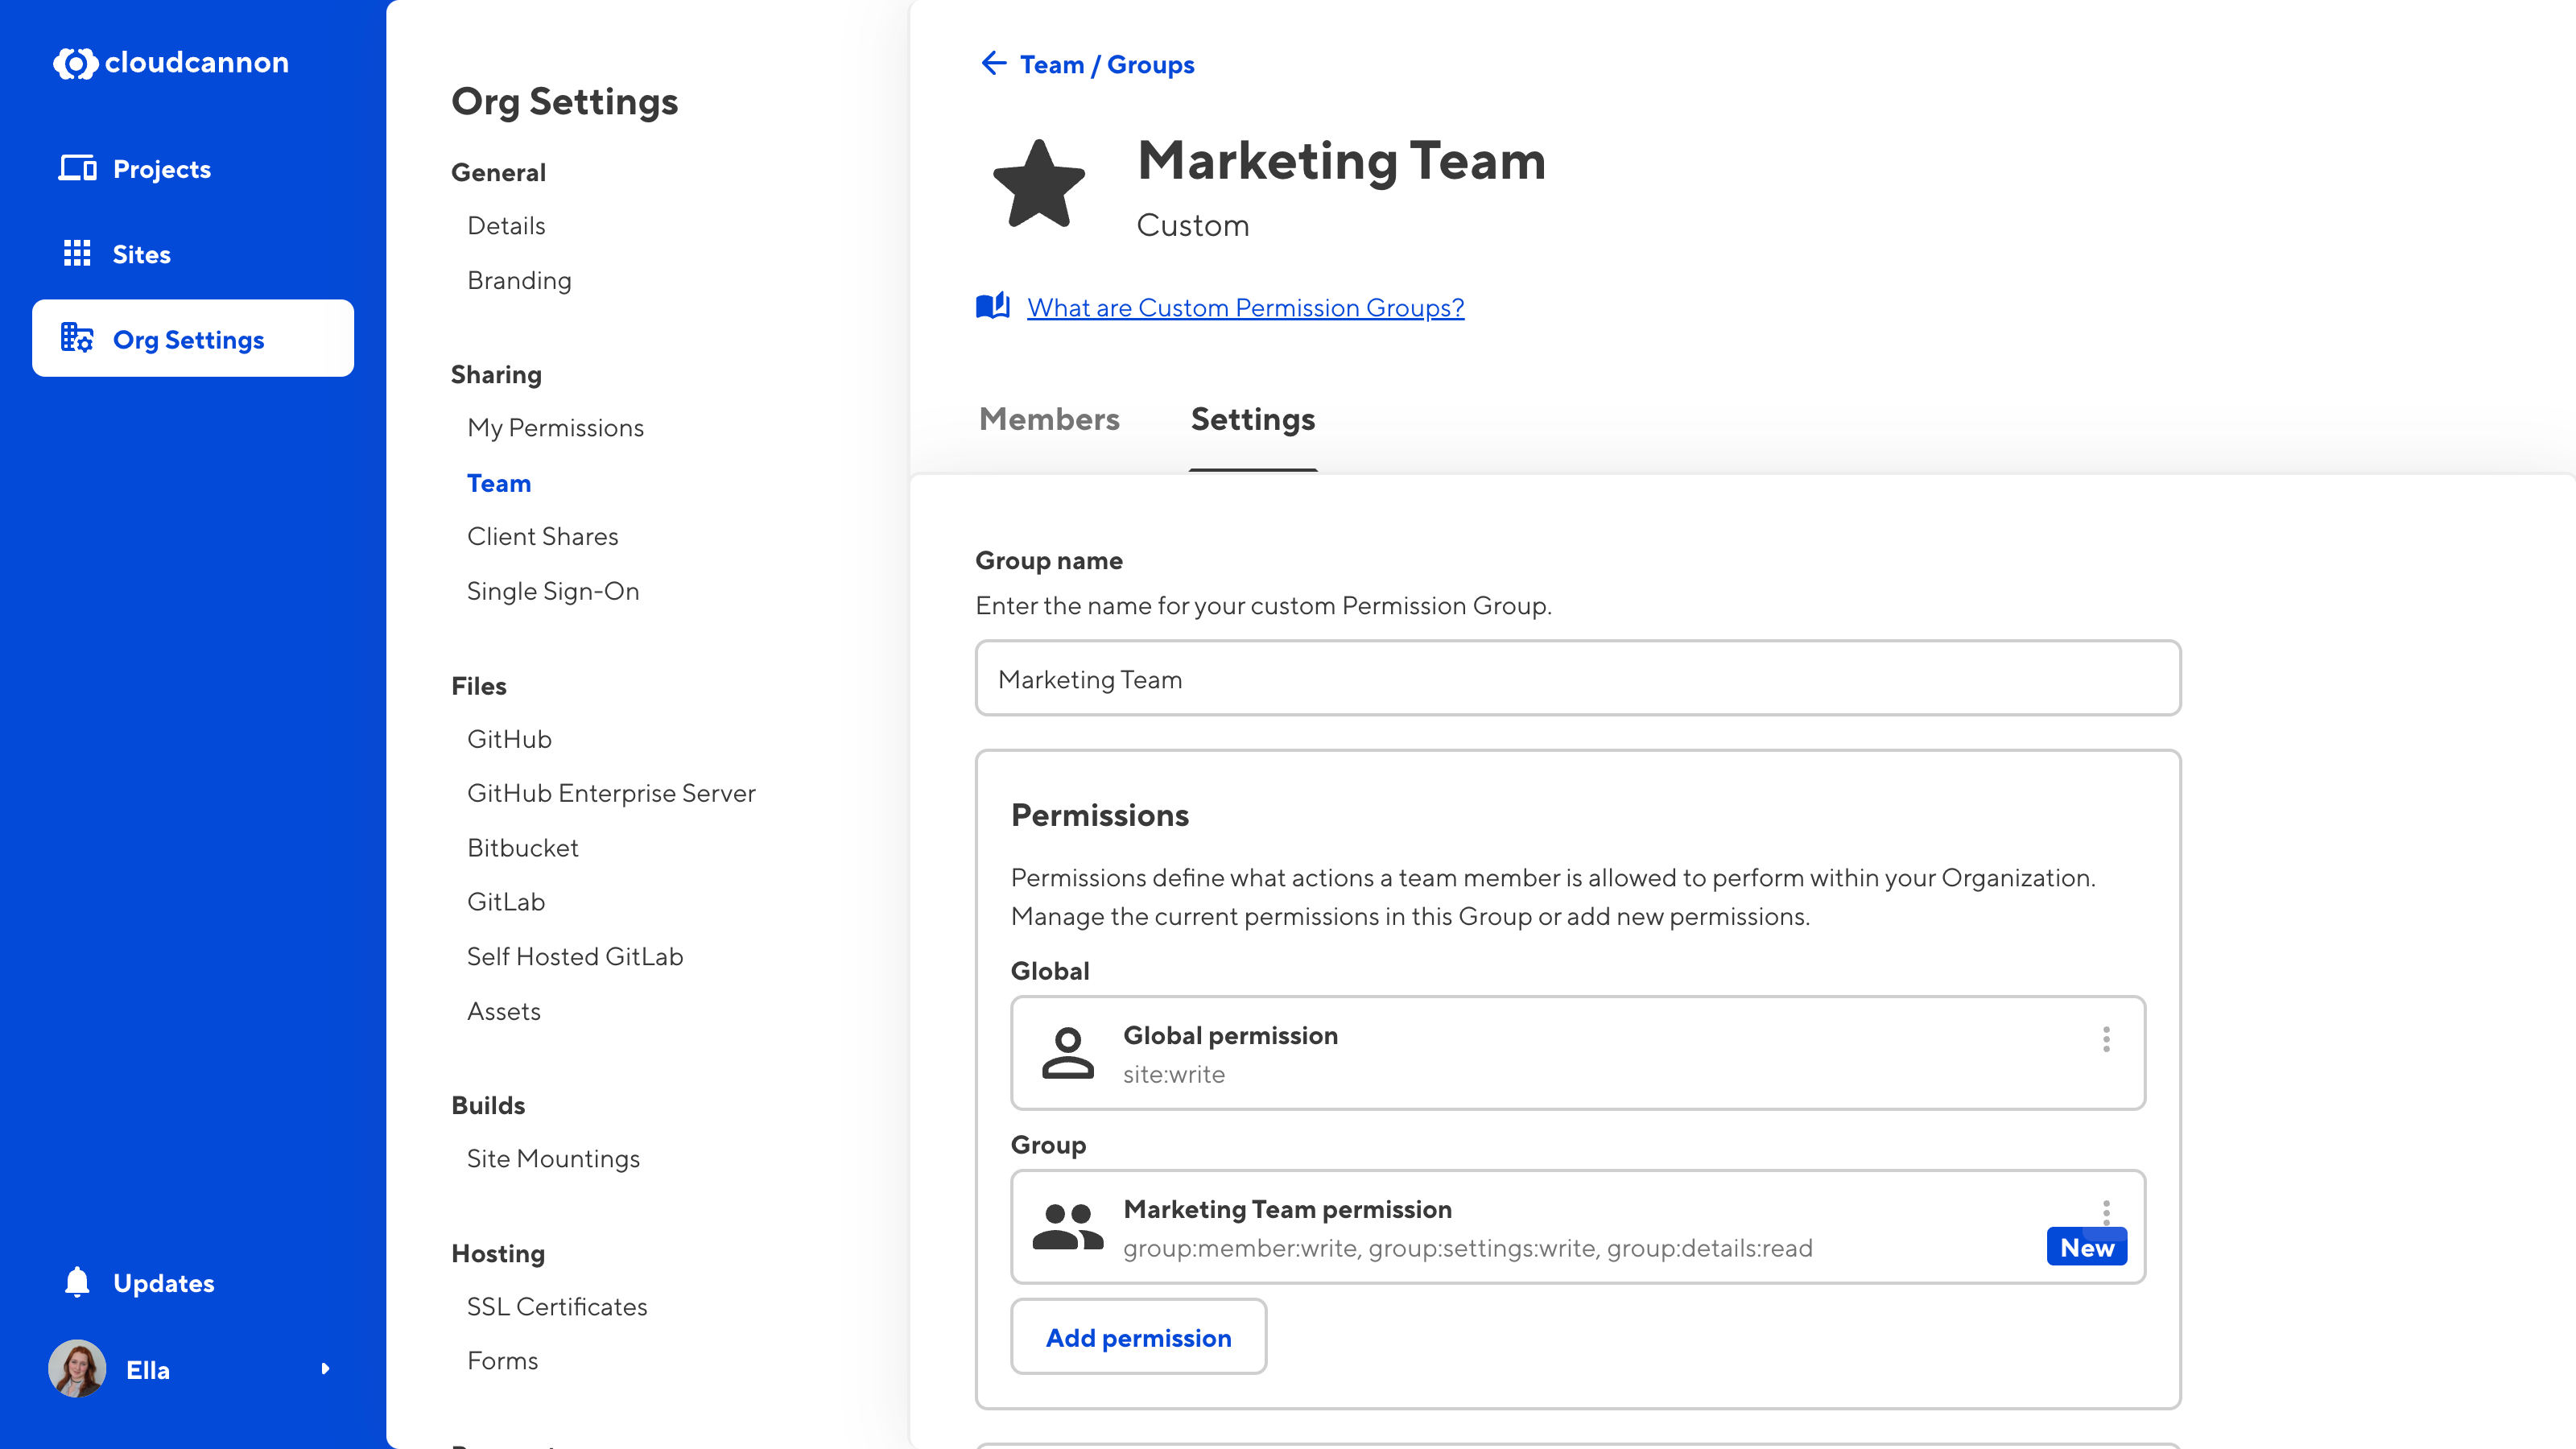 A screenshot of the Marketing Team Permission Group page shows one existing permission and one new permission, as well as the Add Permission button.